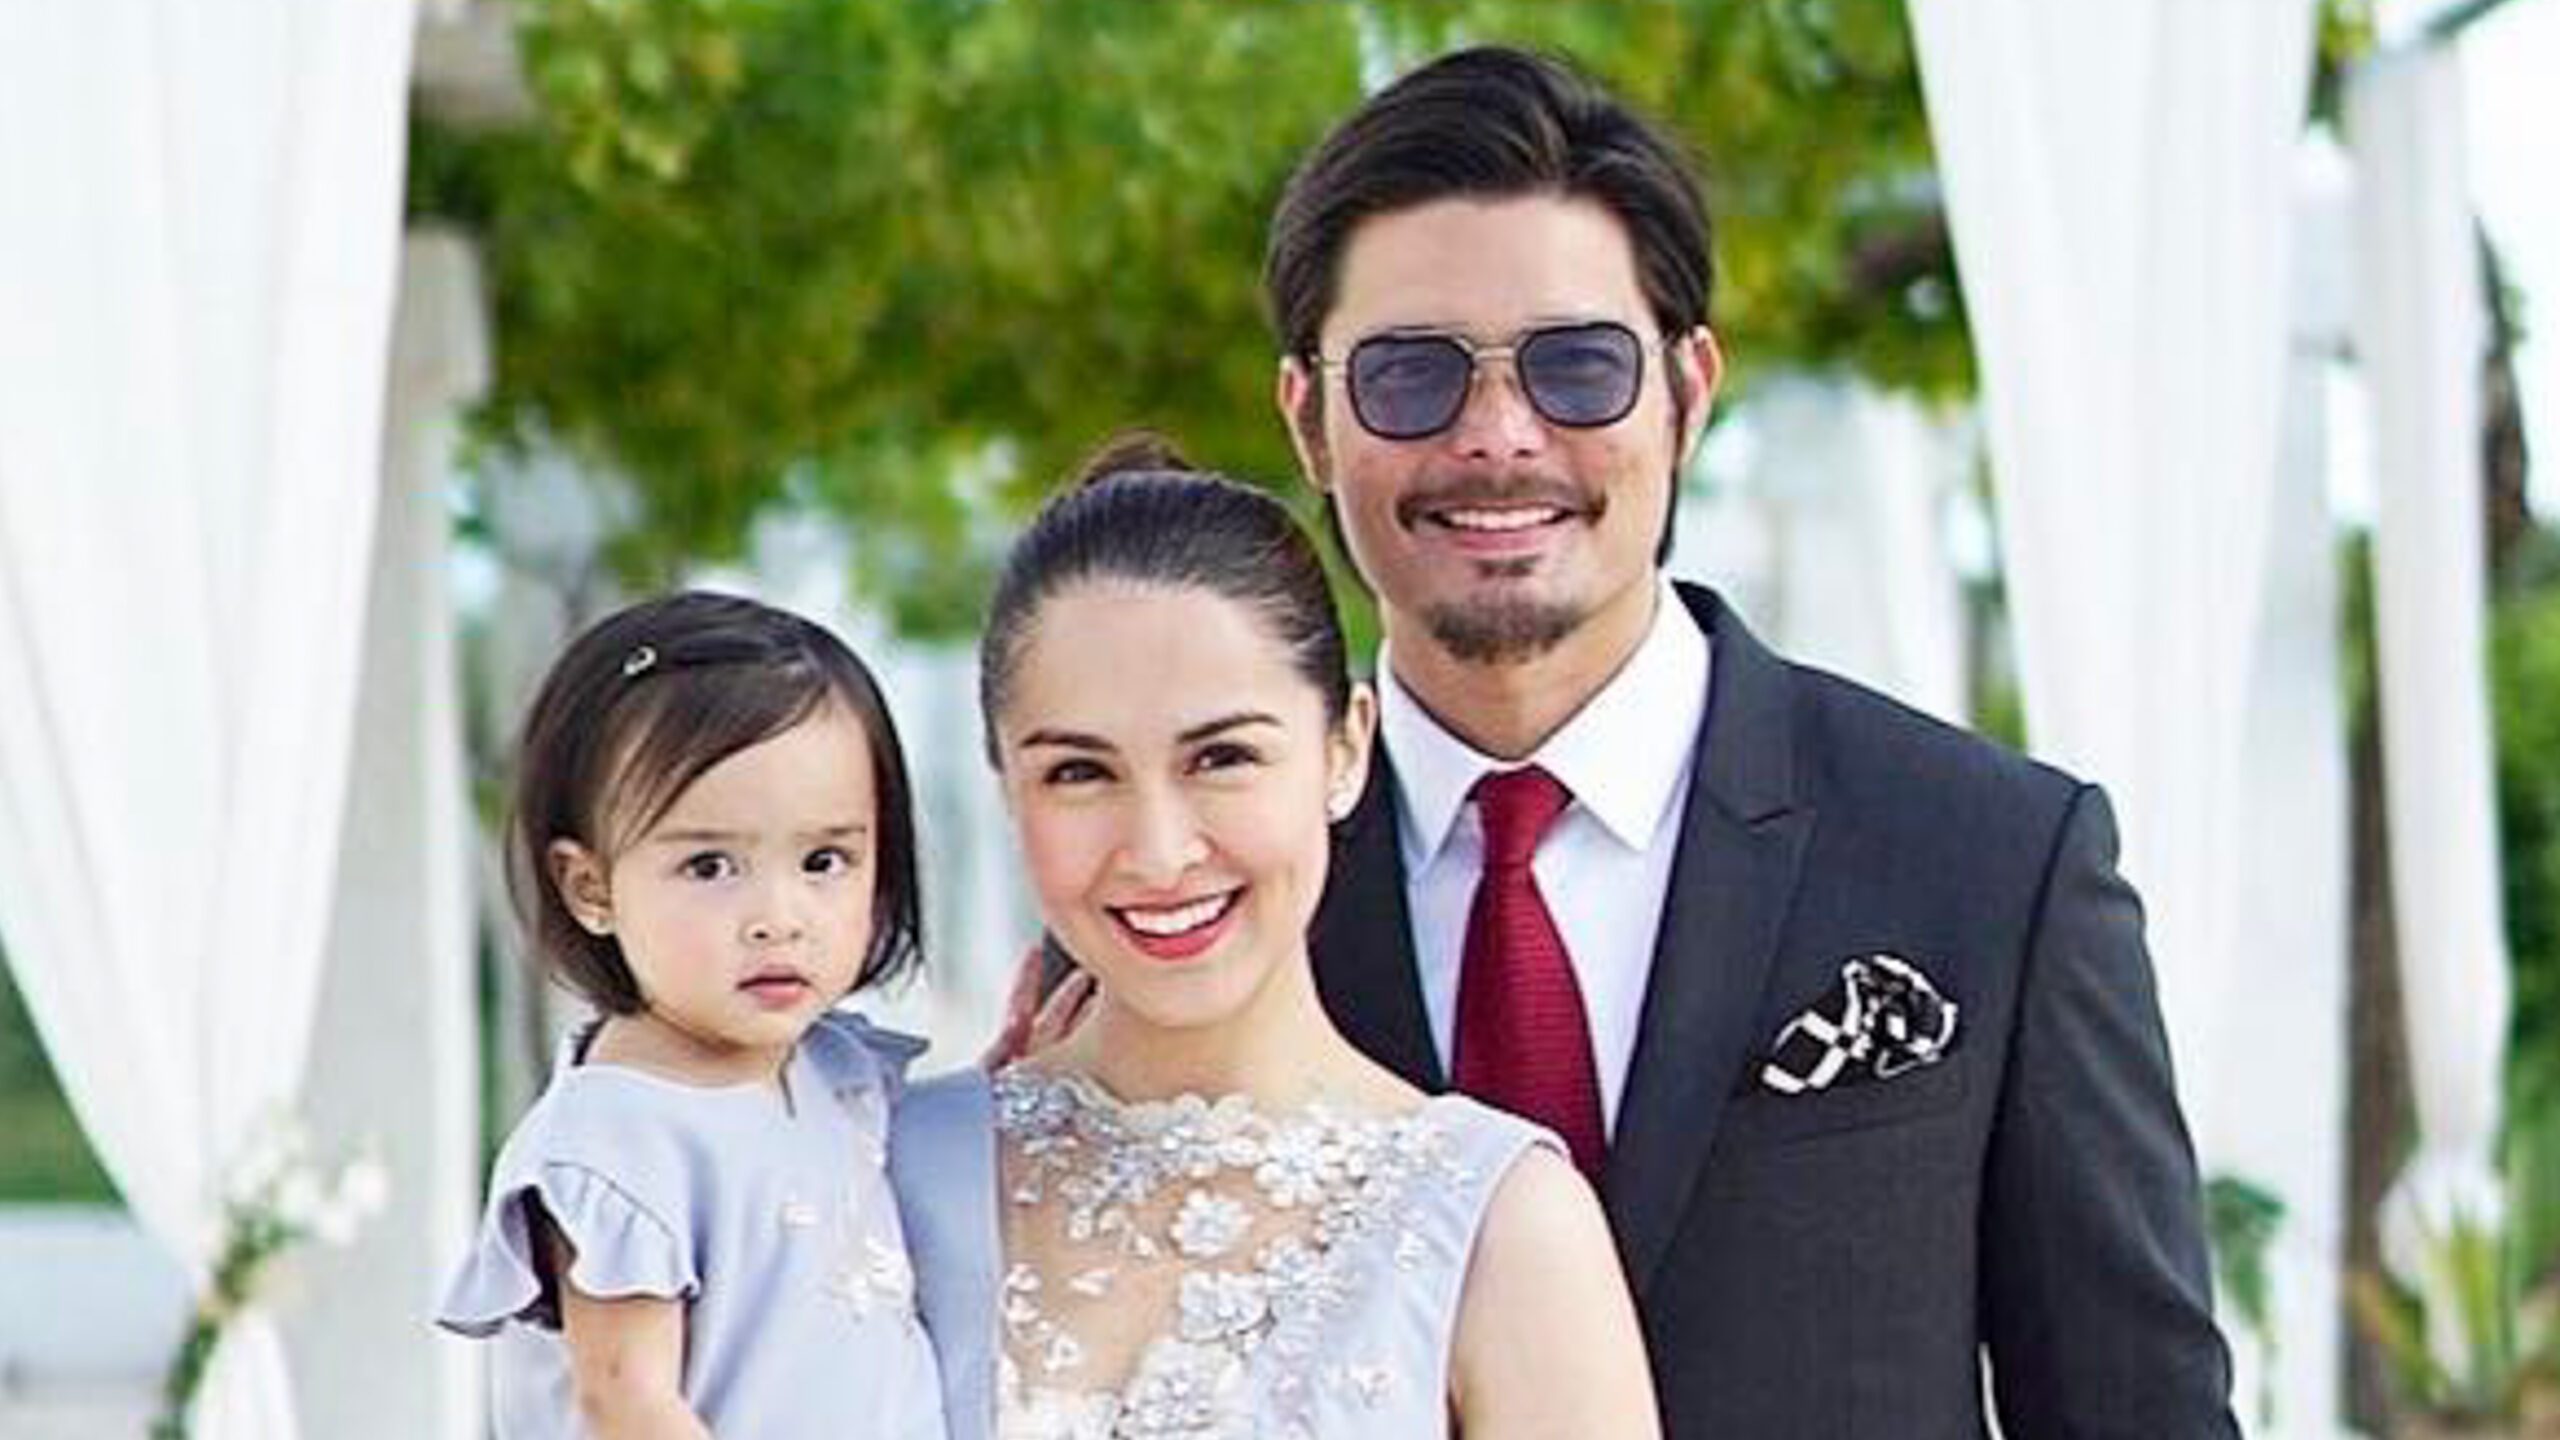 IN PHOTOS: Famous personalities at Pam Quiñones’ wedding